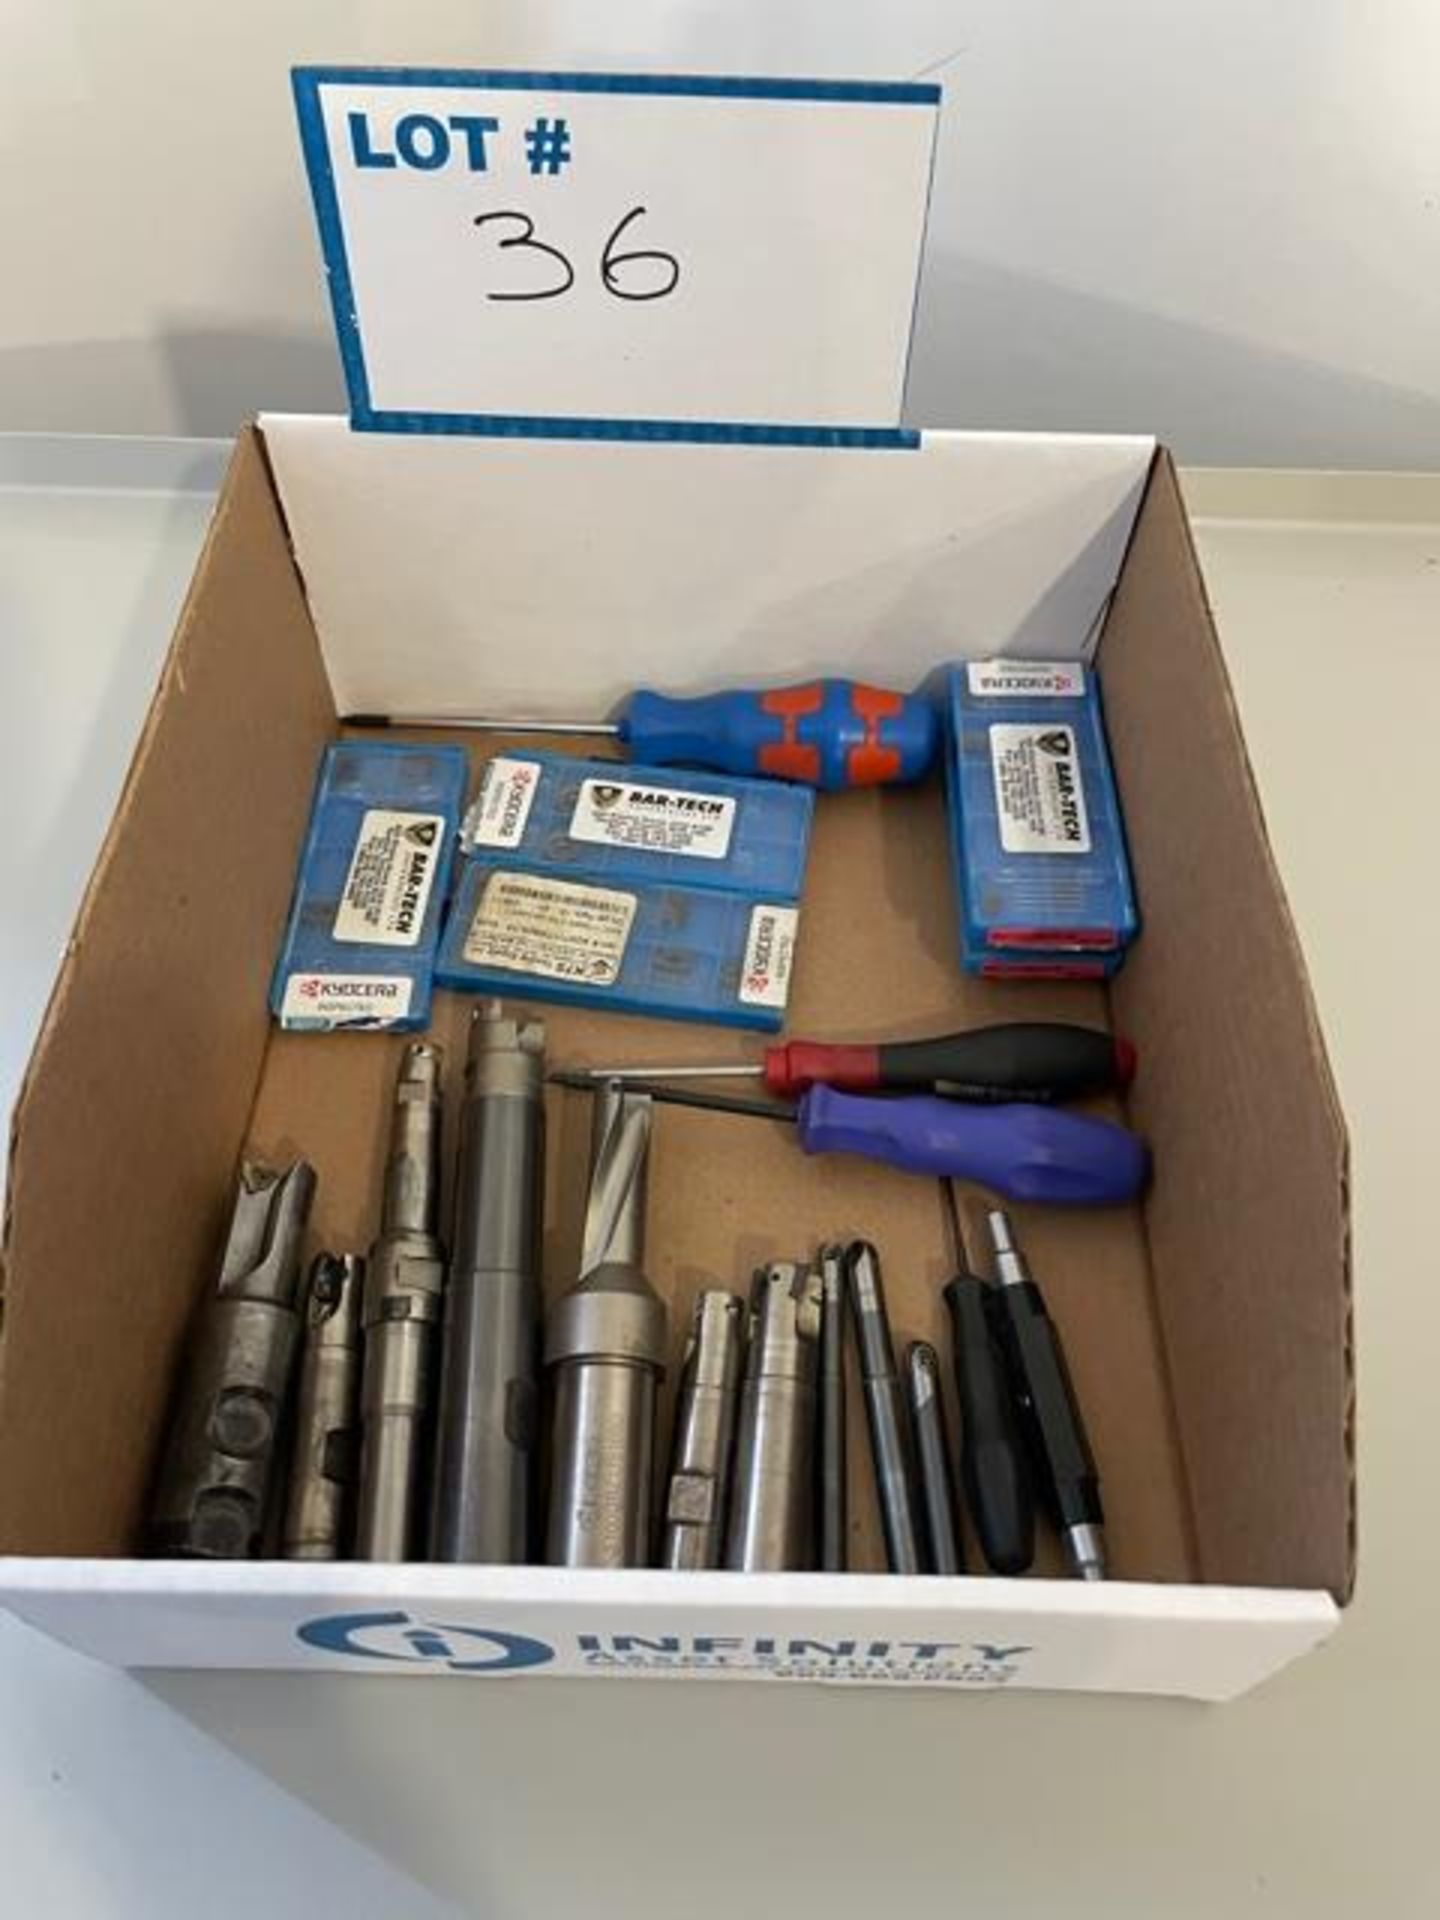 15mm, Seco cutter, 2 Inserts body , 8 mm dia inserts 1/2? Counterbore tool, Kennametal 25mm Seco